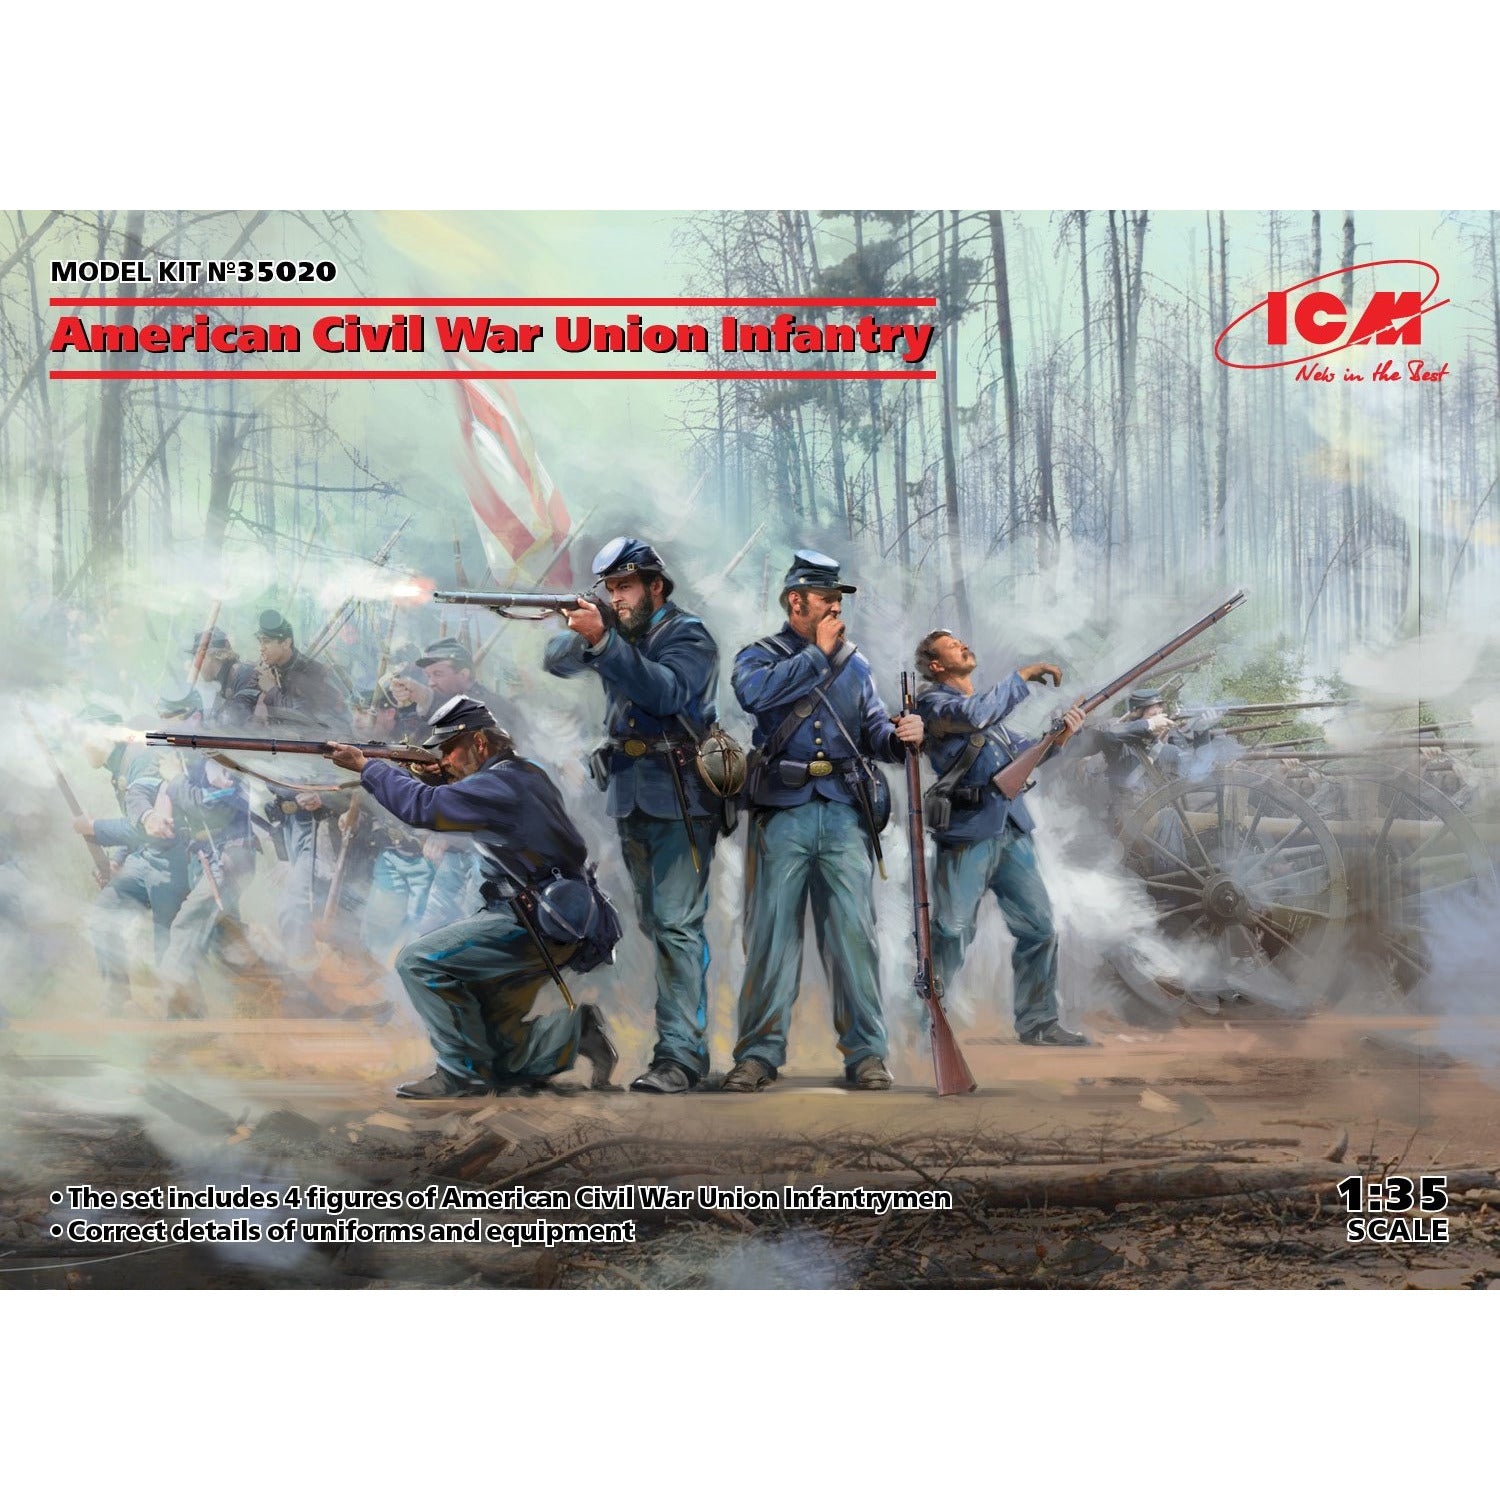 American Civil War Union Infantry (new molds) 1/35 Scale 1/35 by ICM